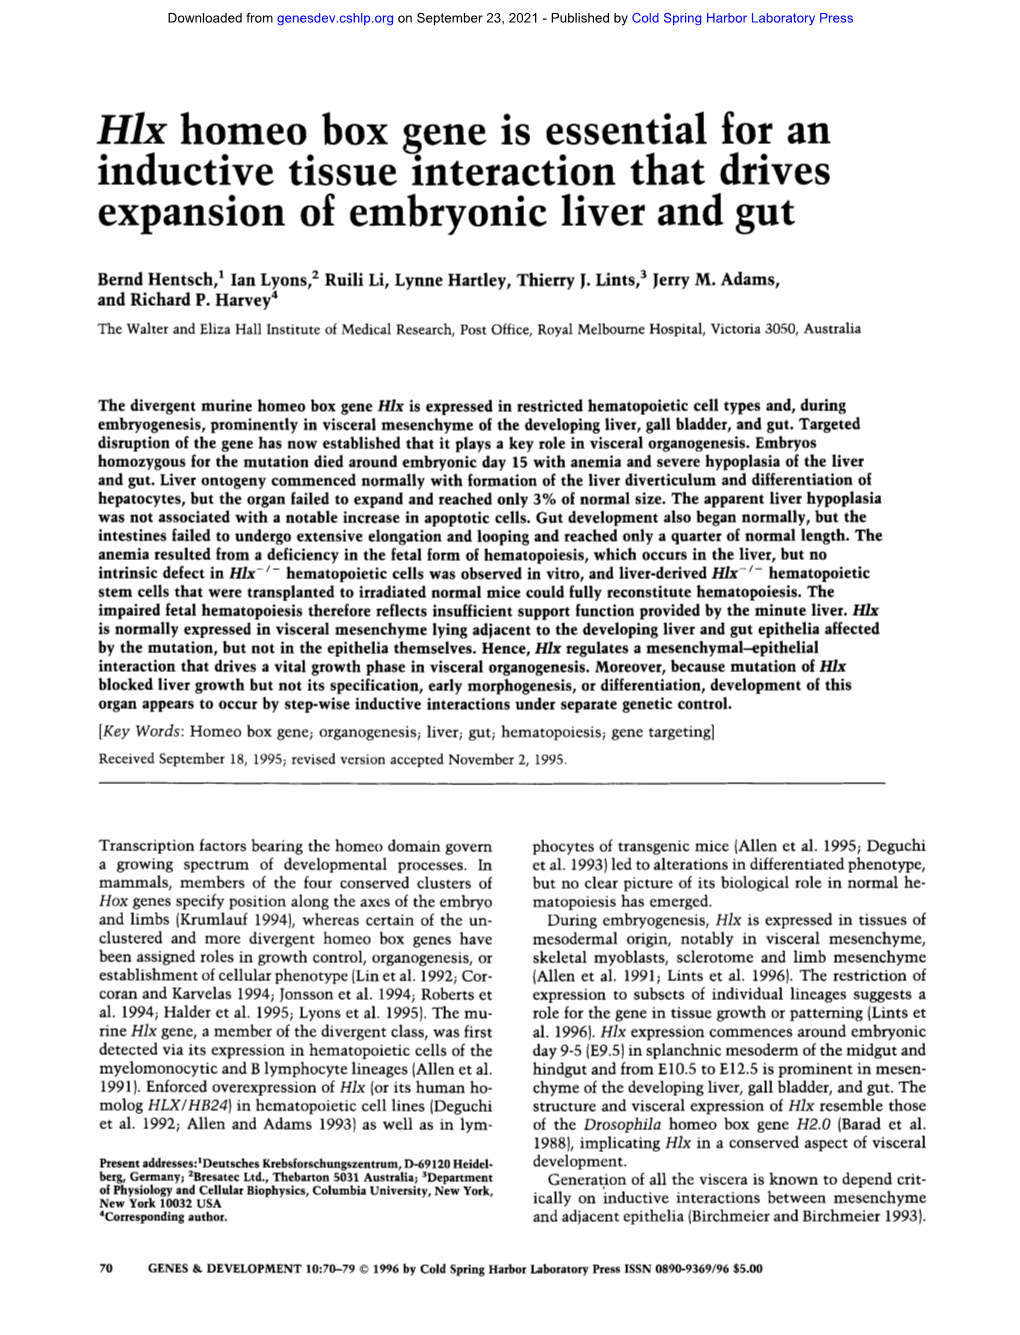 Hlx Homeo Box Gene Is Essential for an Inductive Tissue Interaction That Drives Expansion of Embryonic Liver and Gut